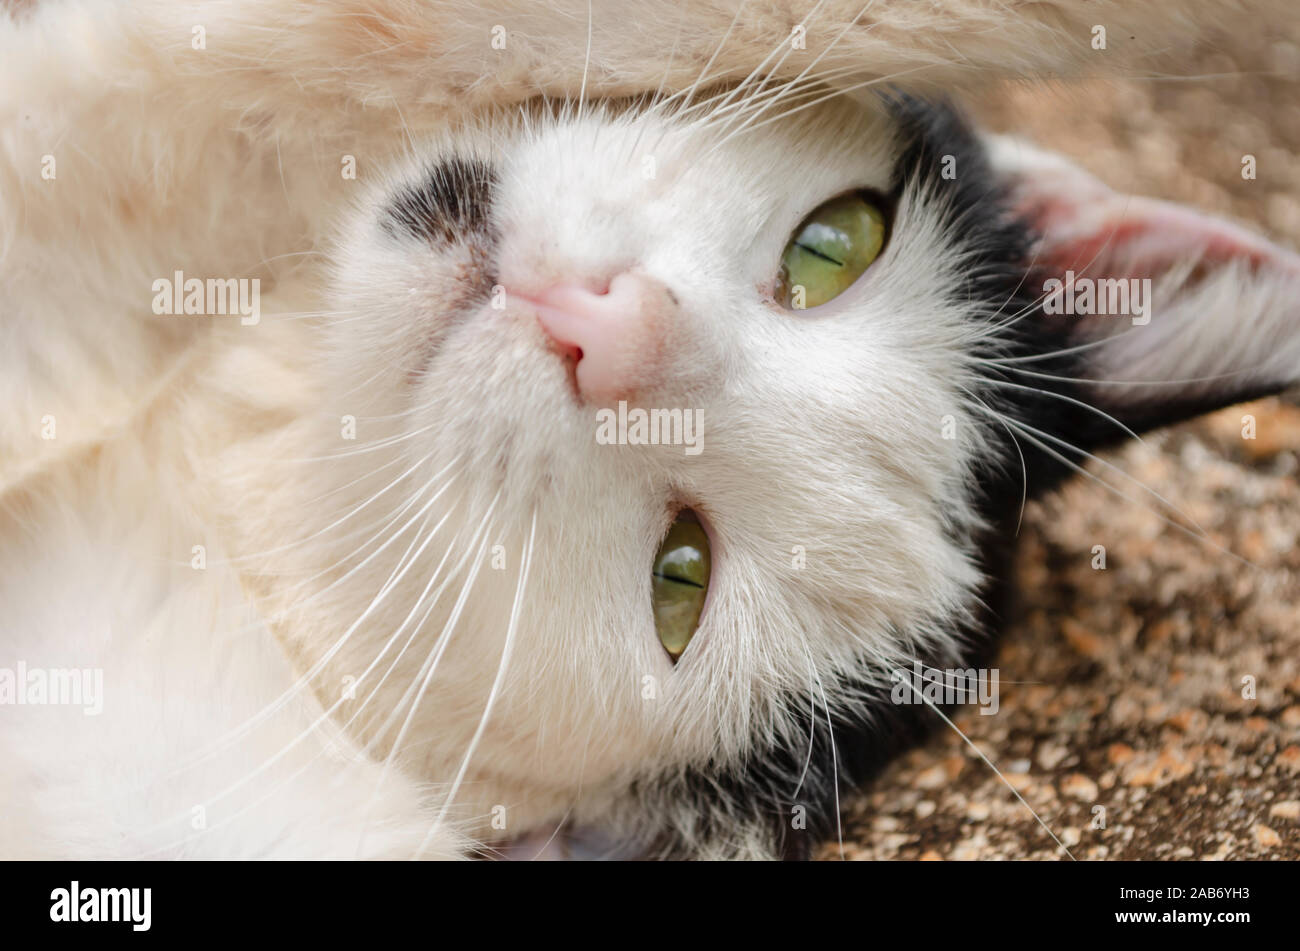 Cat's Eyes With Face Up Stock Photo